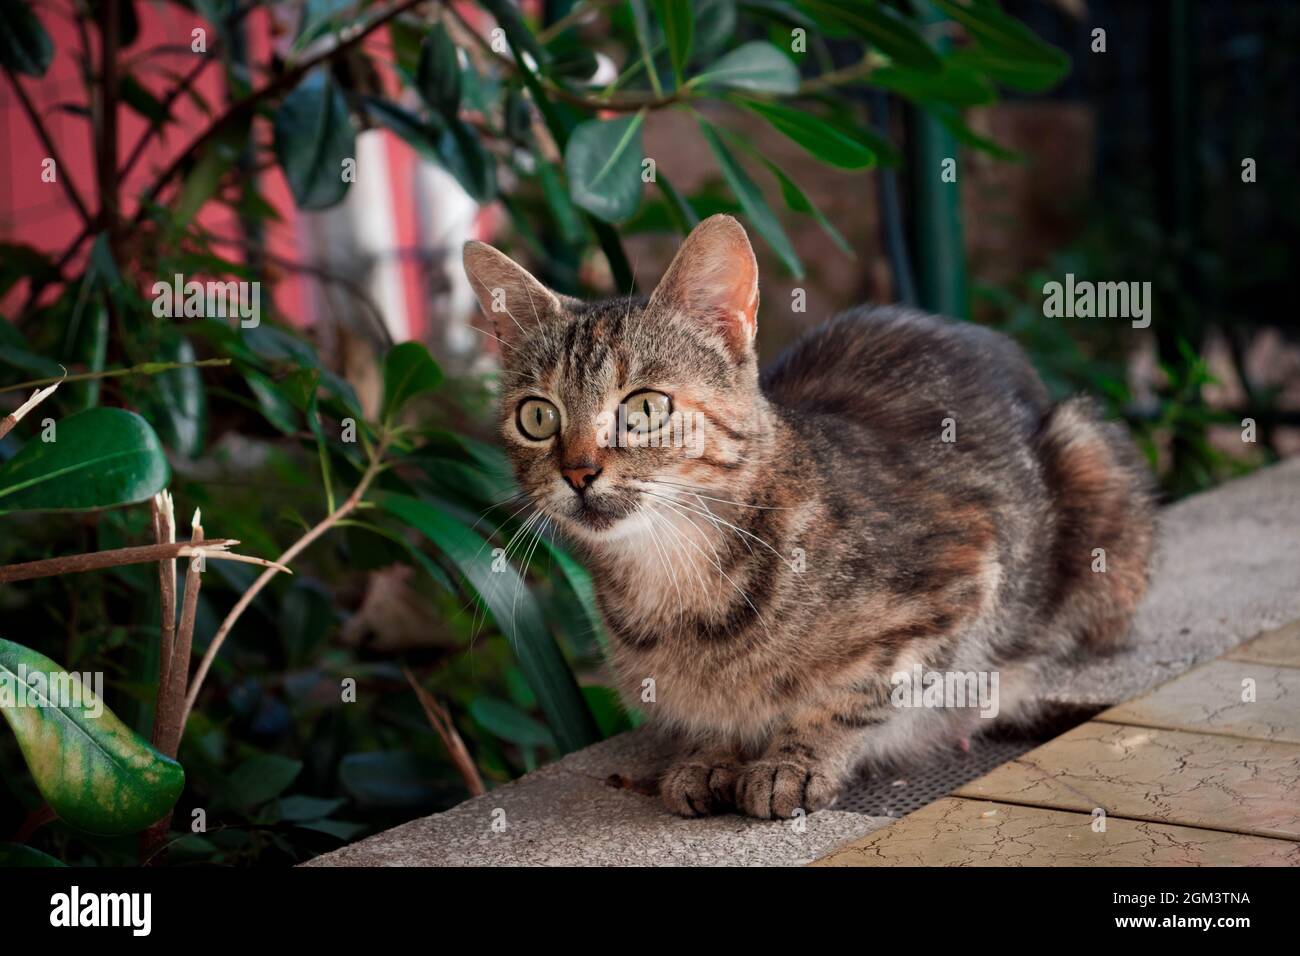 A mom cat sitting on a terrace in a green garden Stock Photo